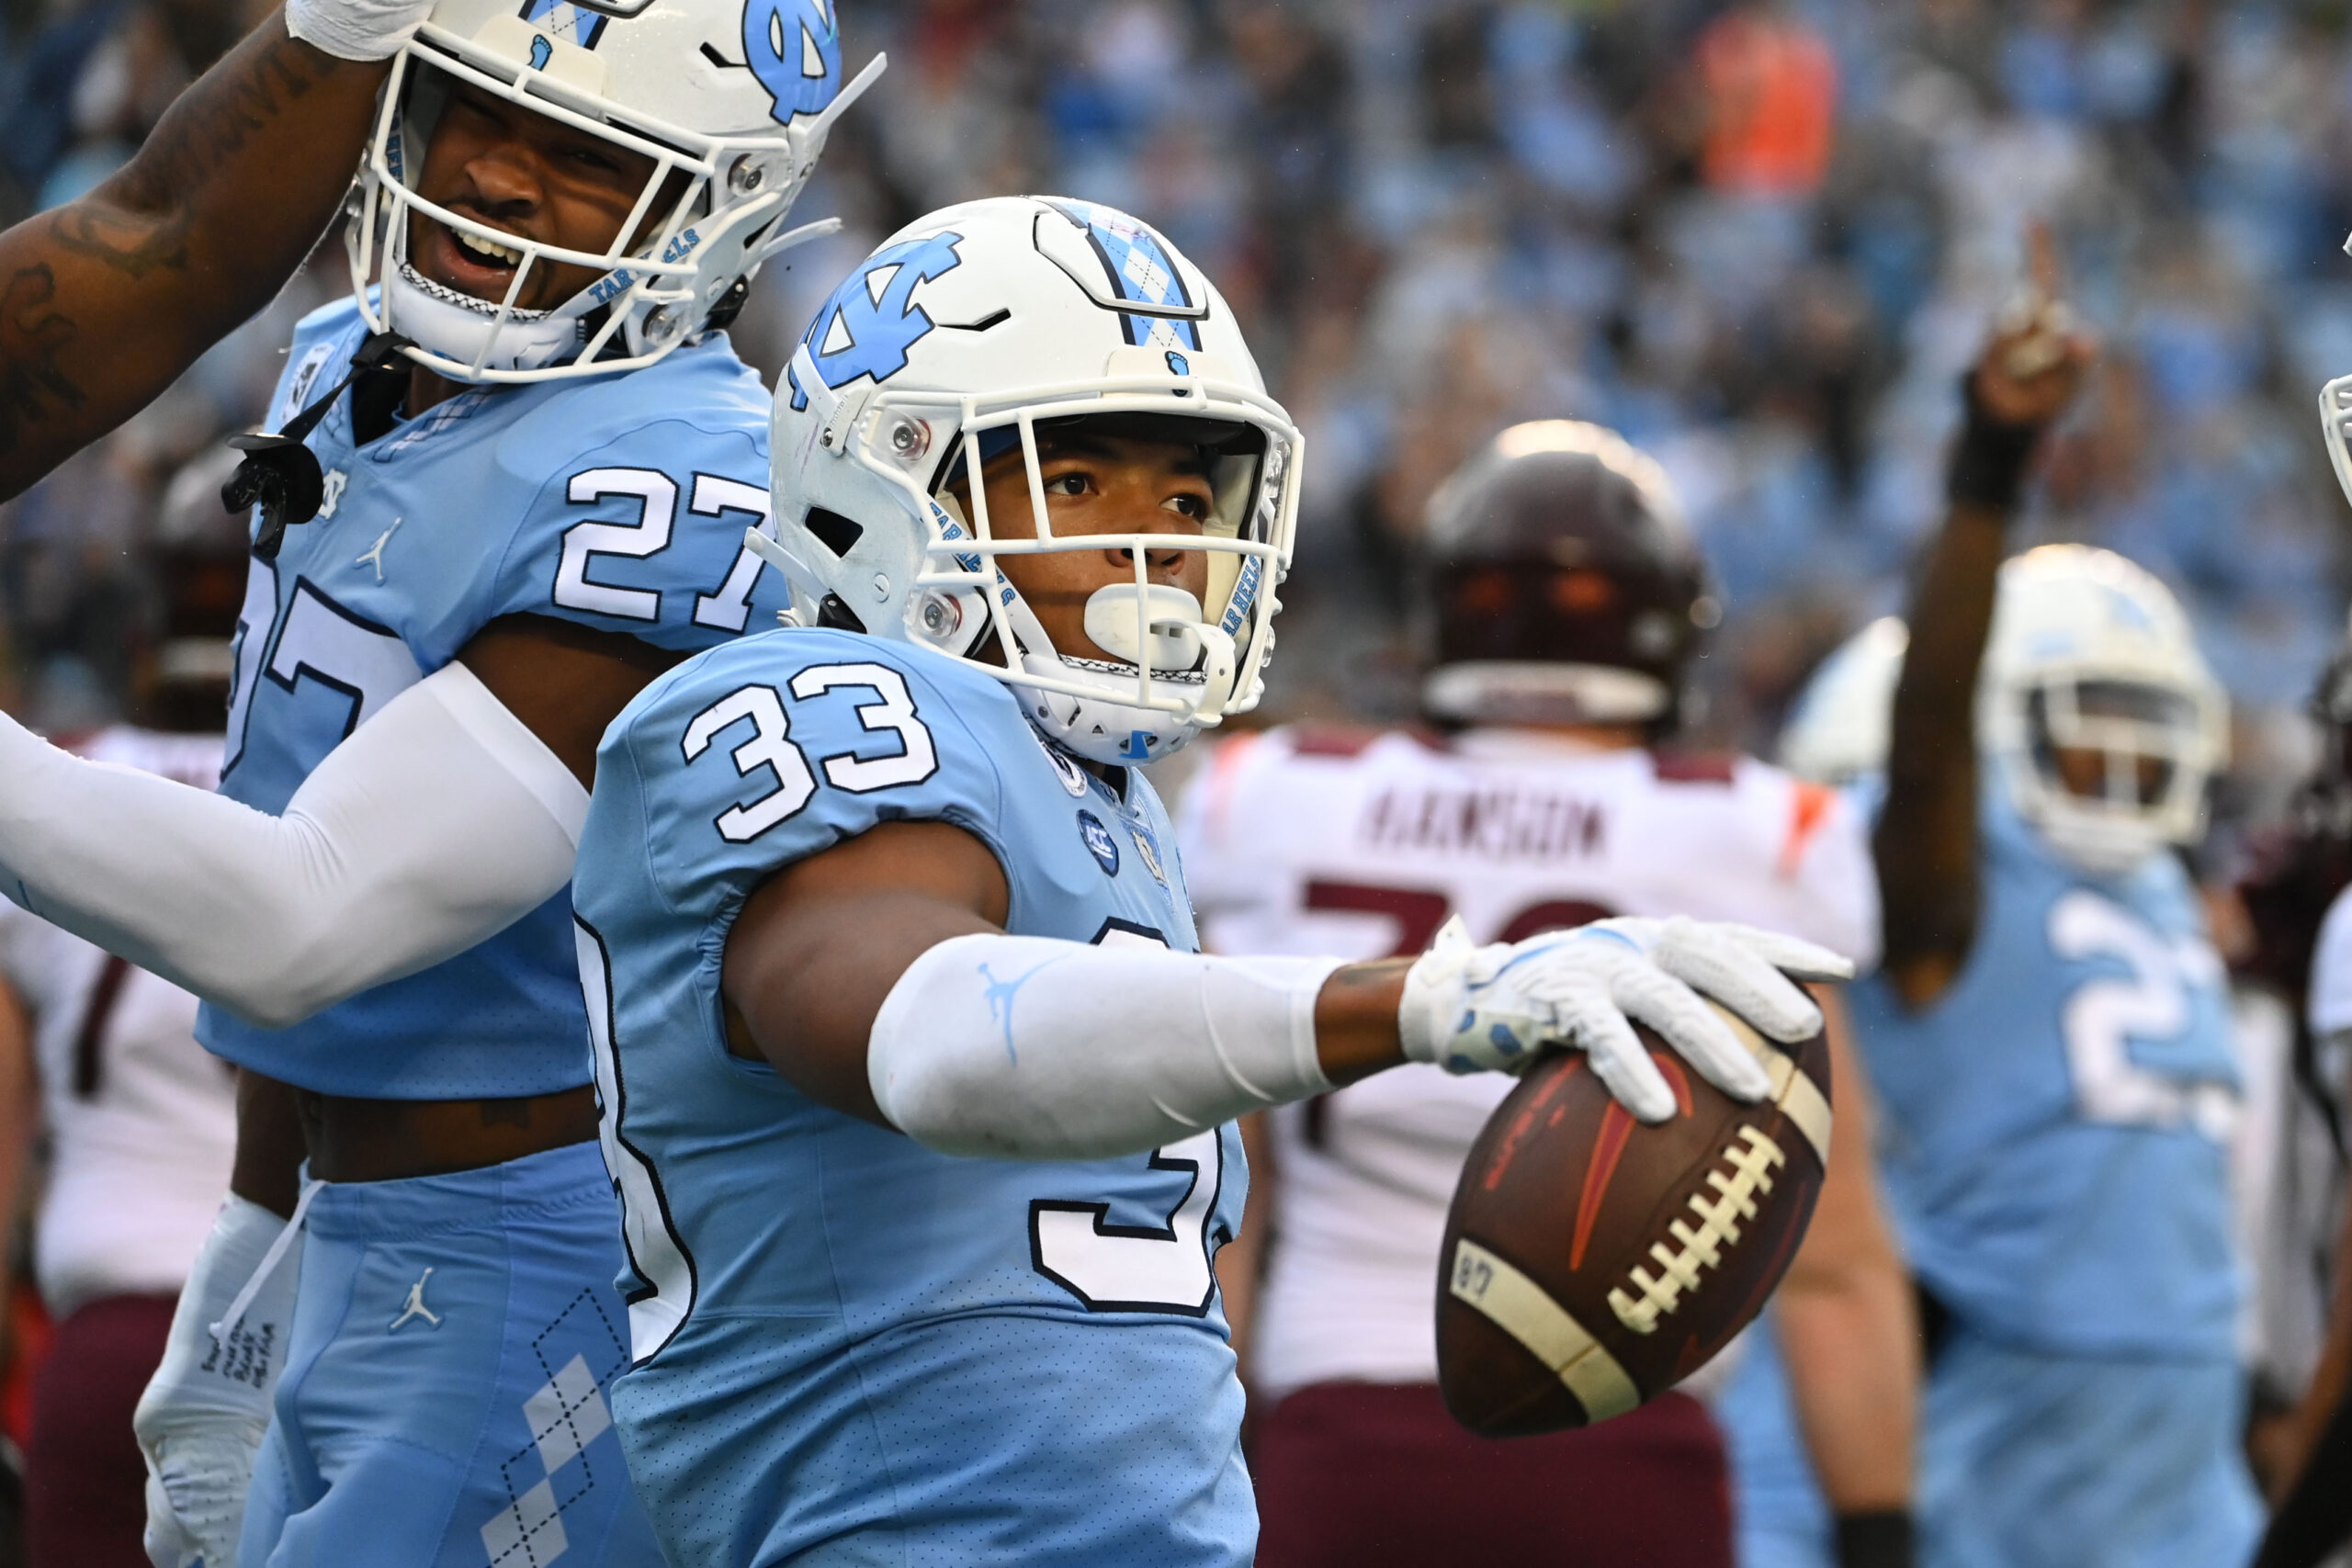 North Carolina’s defense steps up in a blowout win against Virginia Tech